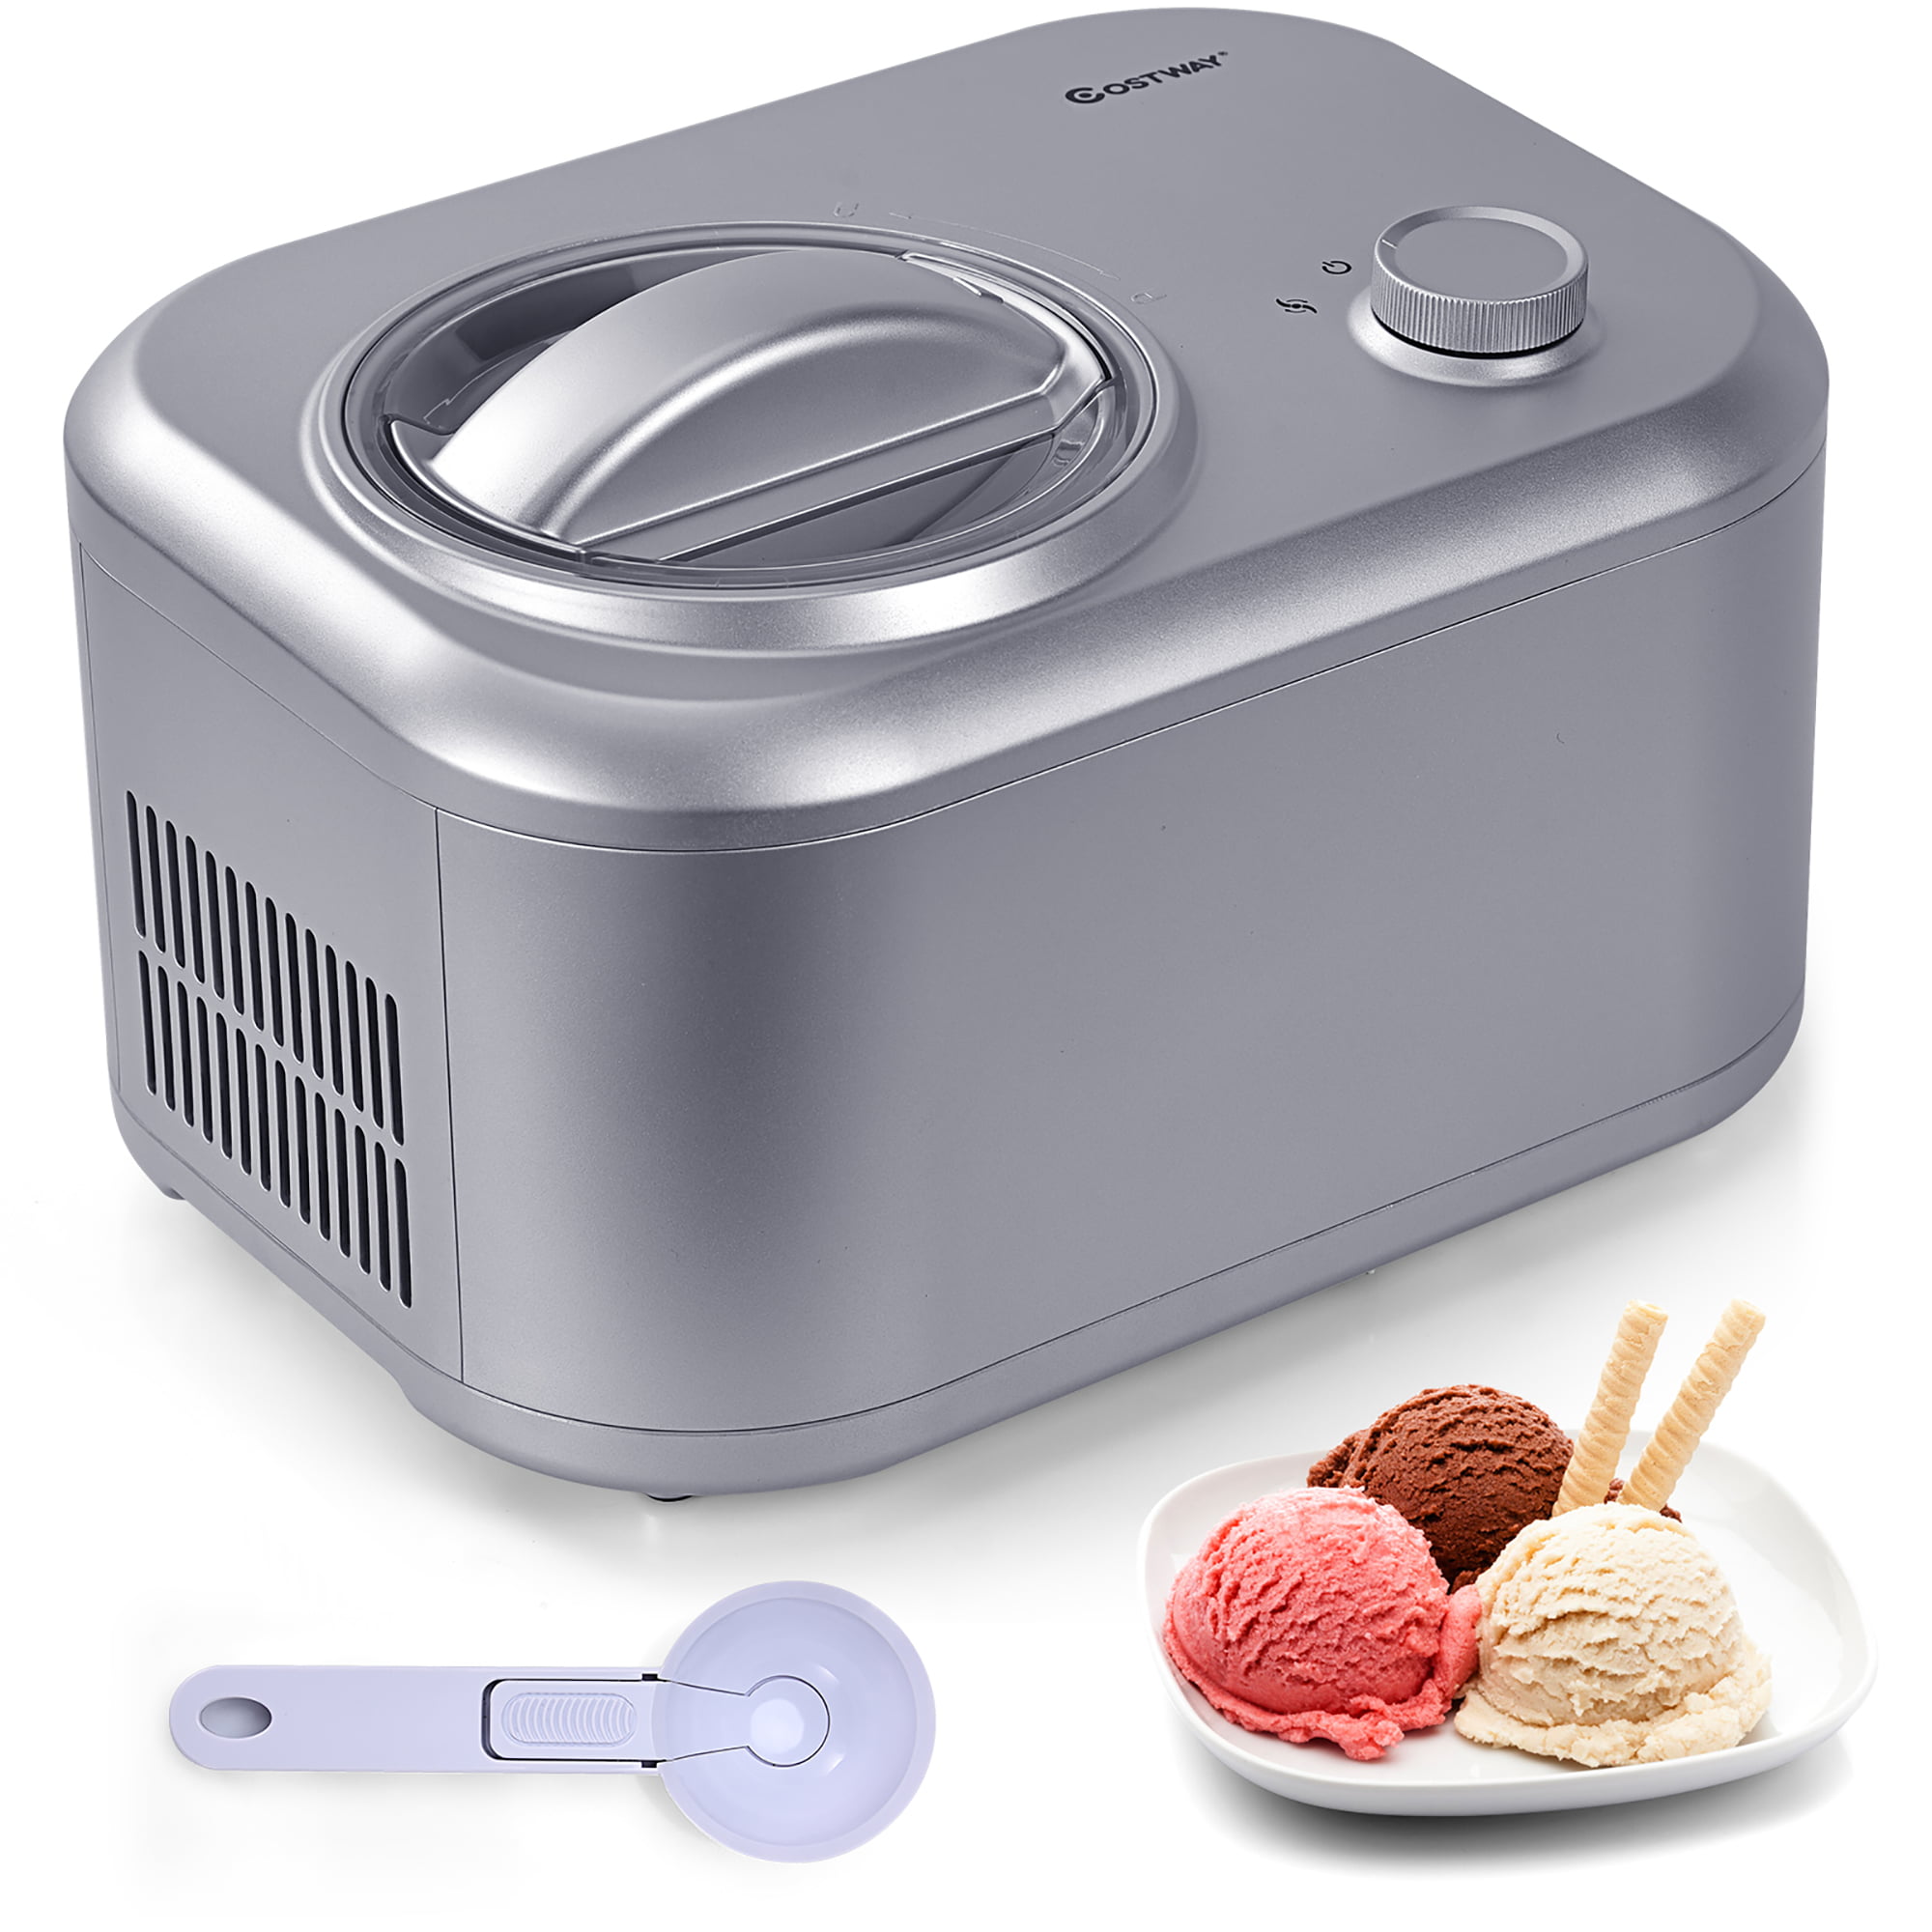 2.1-Quart Costway Ice Cream Maker Automatic Stainless Steel Electric Countertop Large Fruit Yogurt Ice-cream Machine with LCD Timer Control 